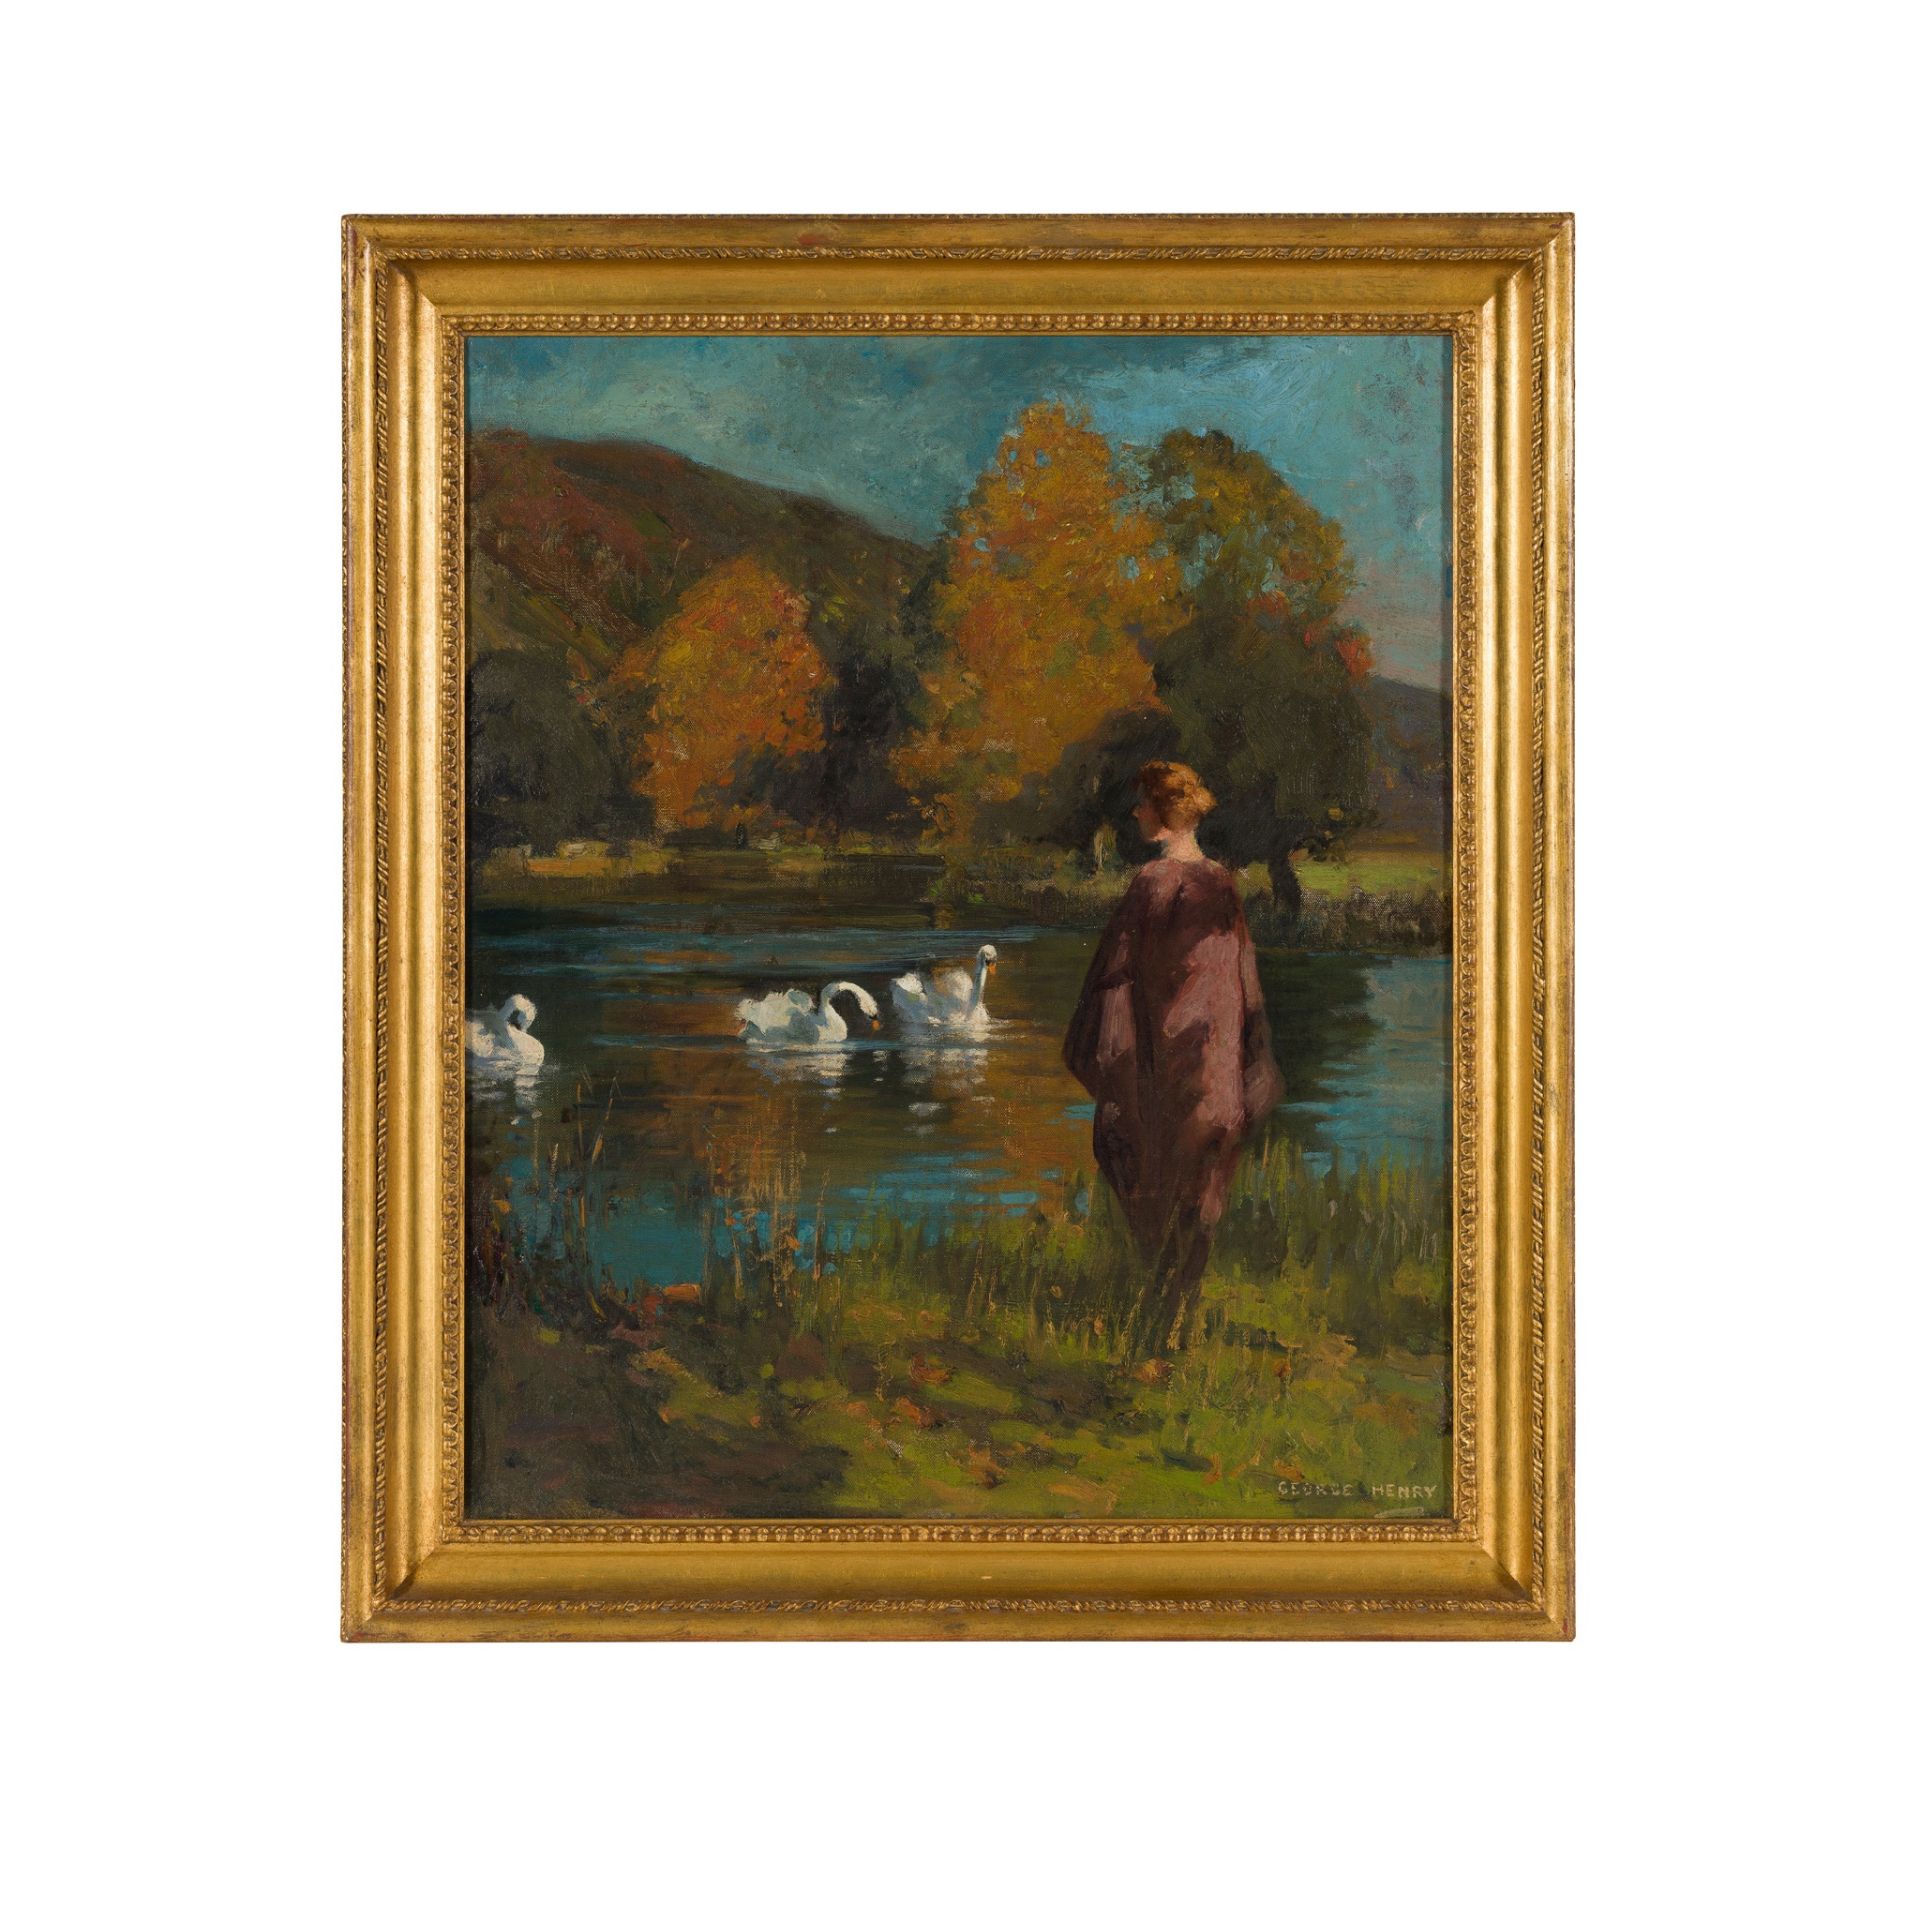 GEORGE HENRY R.A., R.S.A., R.S.W. (SCOTTISH 1858-1943) AUTUMN BY THE LAKE, GALLOWAY - Bild 2 aus 2